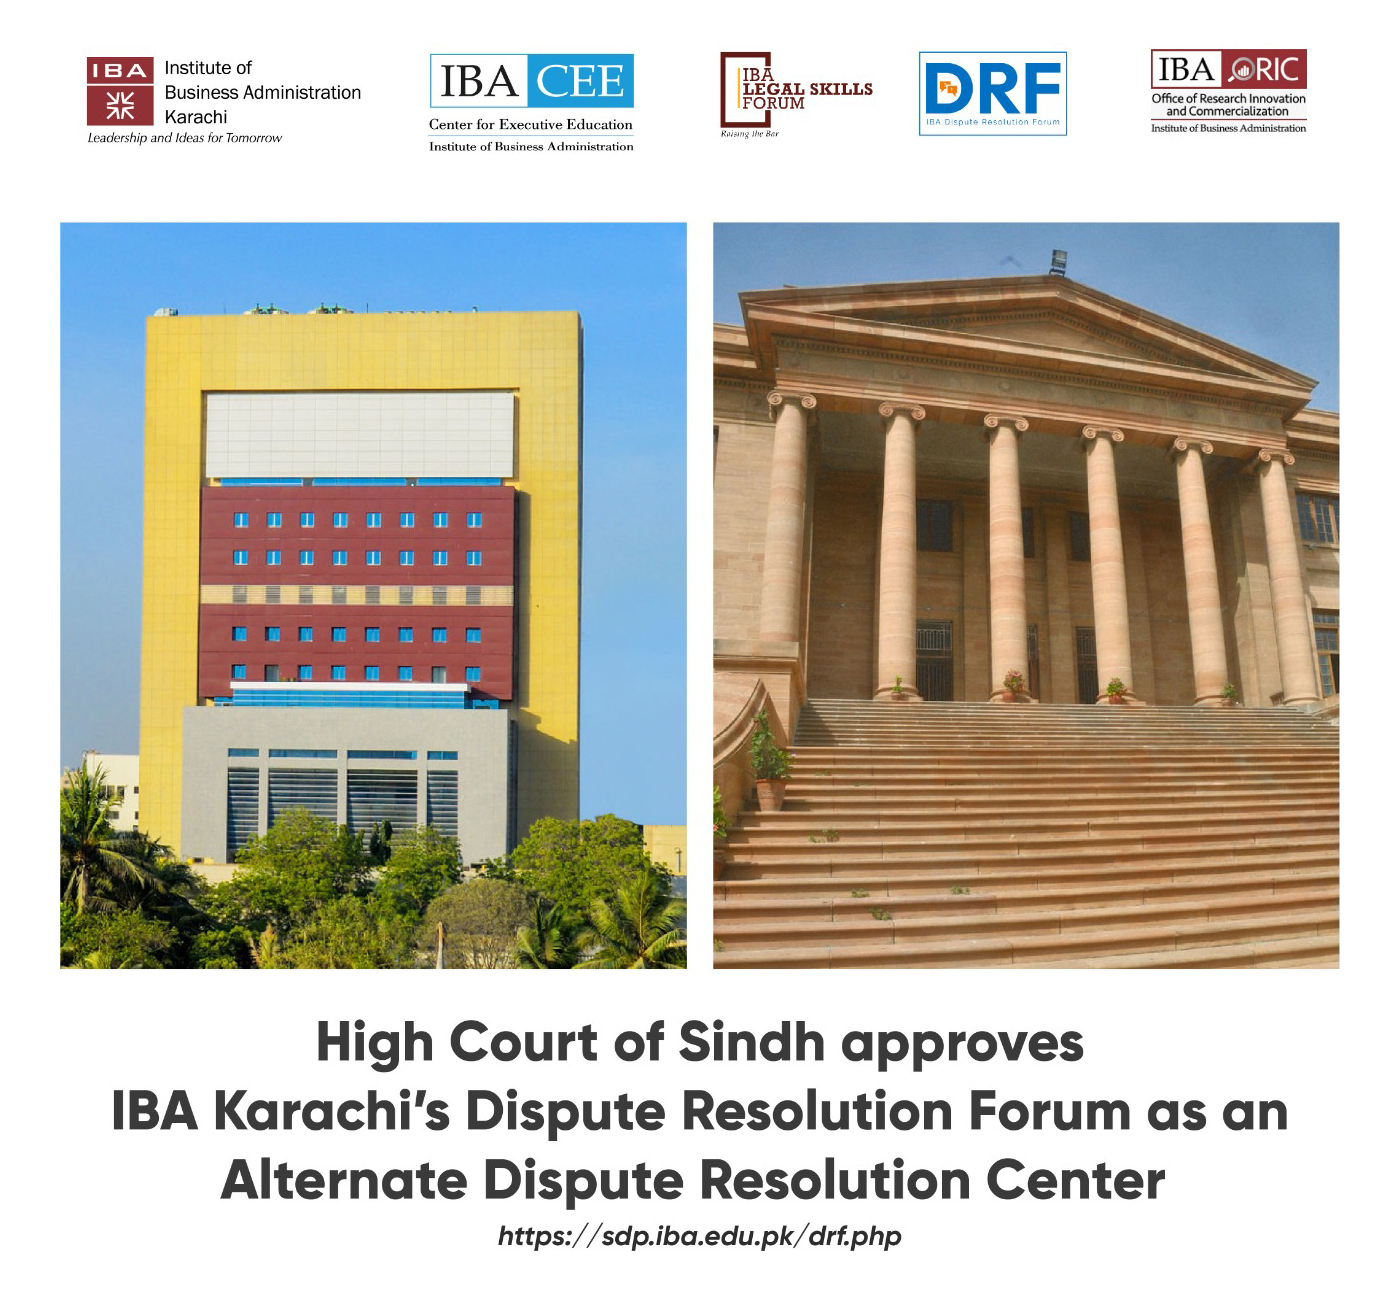 High Court of Sindh approved IBA Karachi's Dispute Resolution Forum as the Alternate Dispute Resolution Center